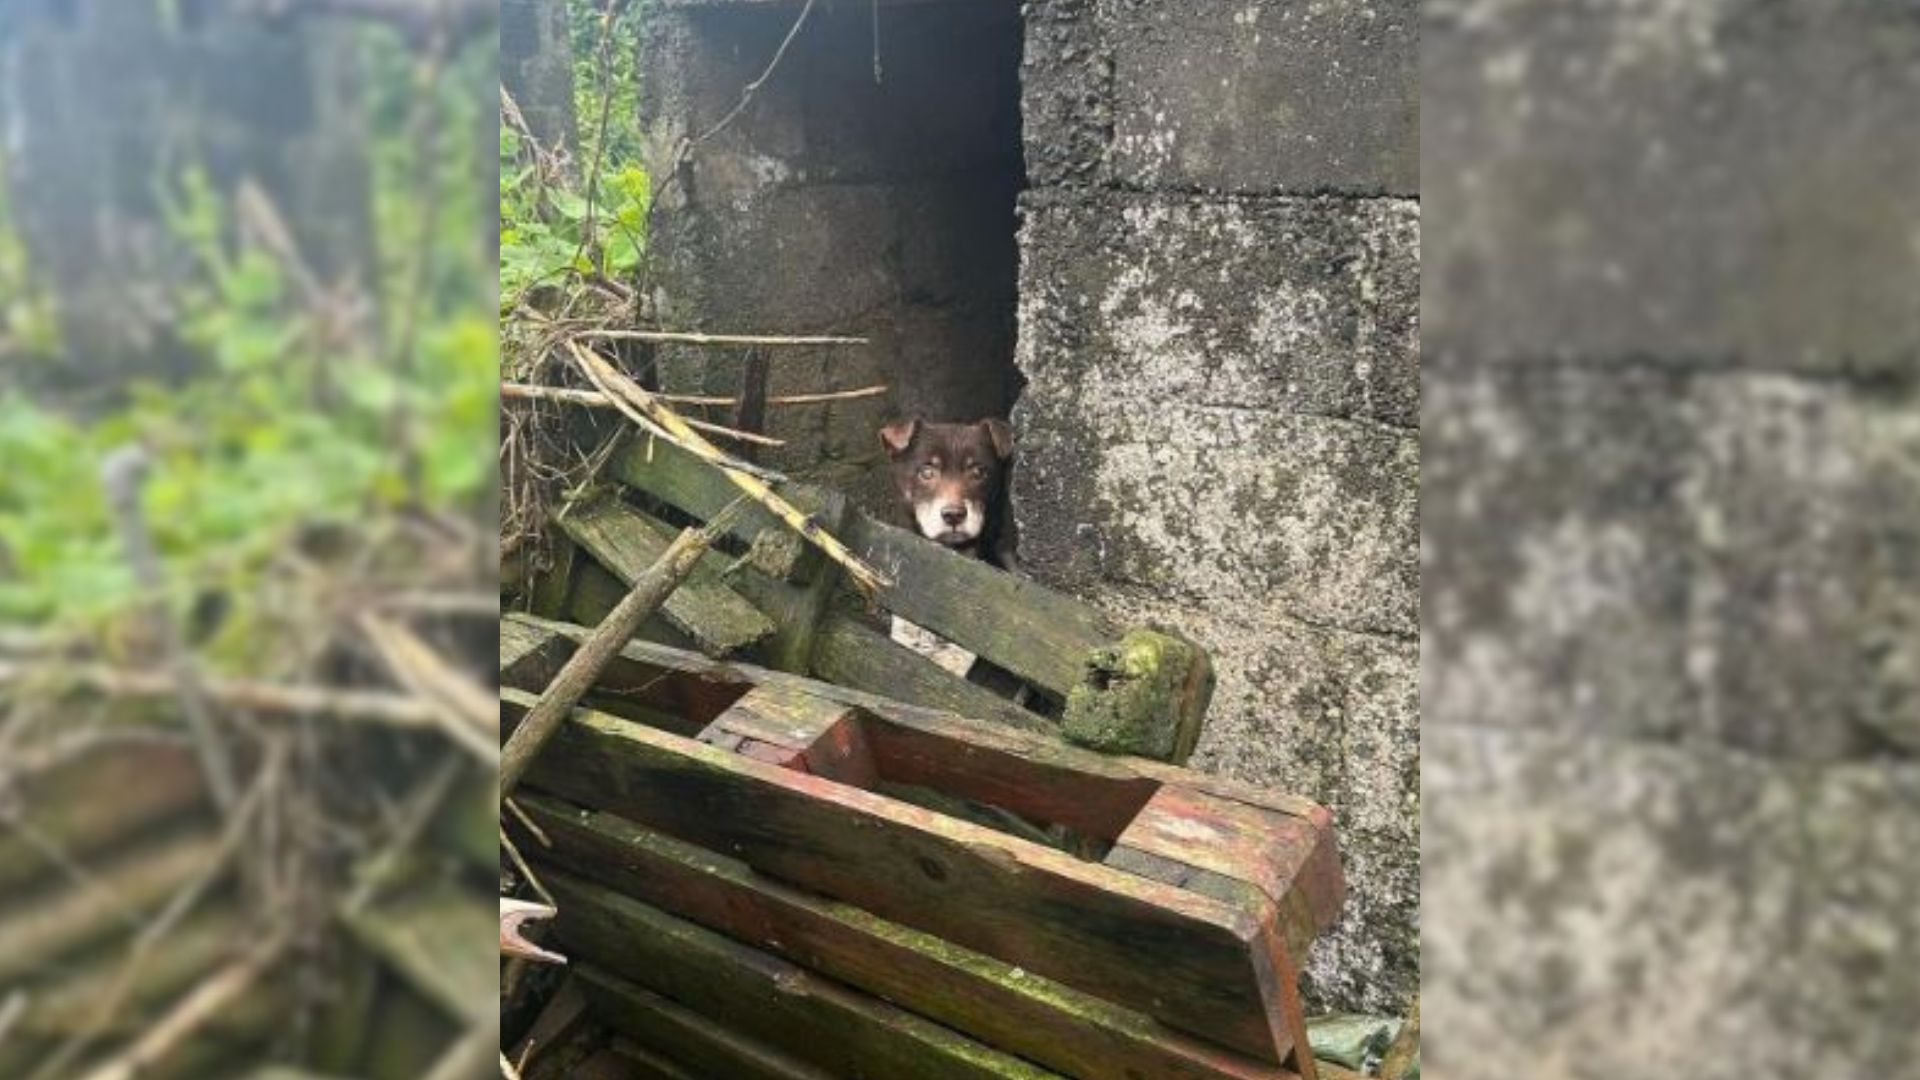 A Sad Dog Who Was Locked Up In A Dirty Place Can’t Stop Smiling After He Feels Loved Again